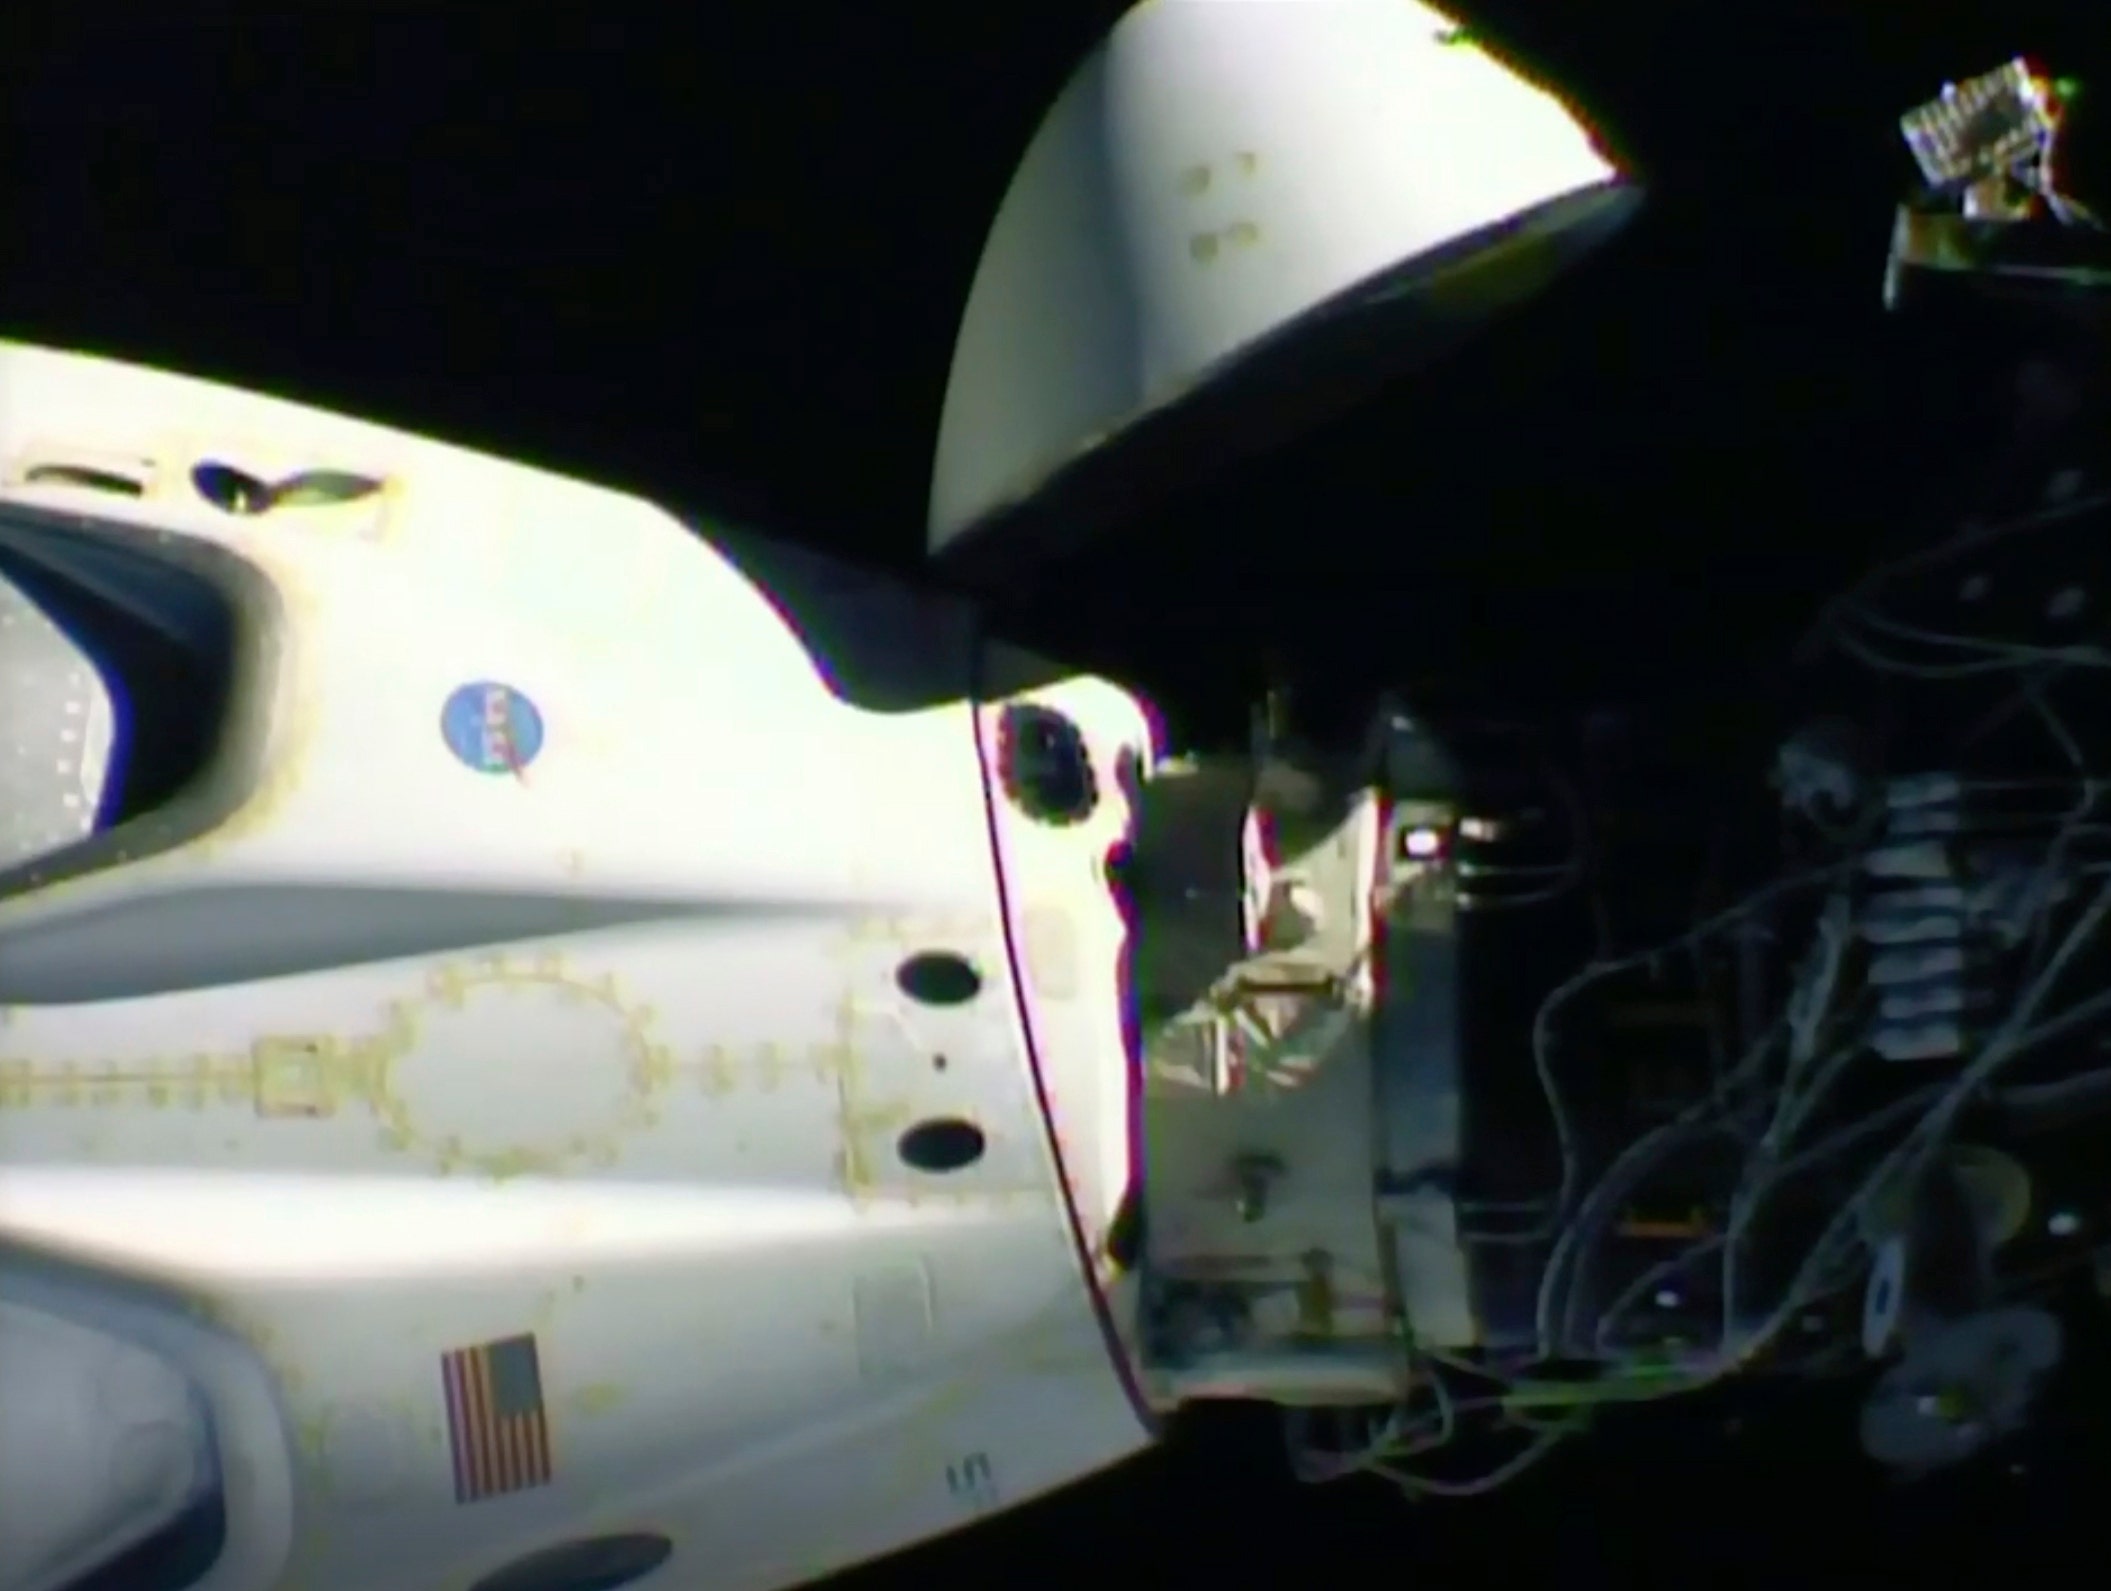 SpaceX’s Dragon spacecraft splashes off the west coast of Florida